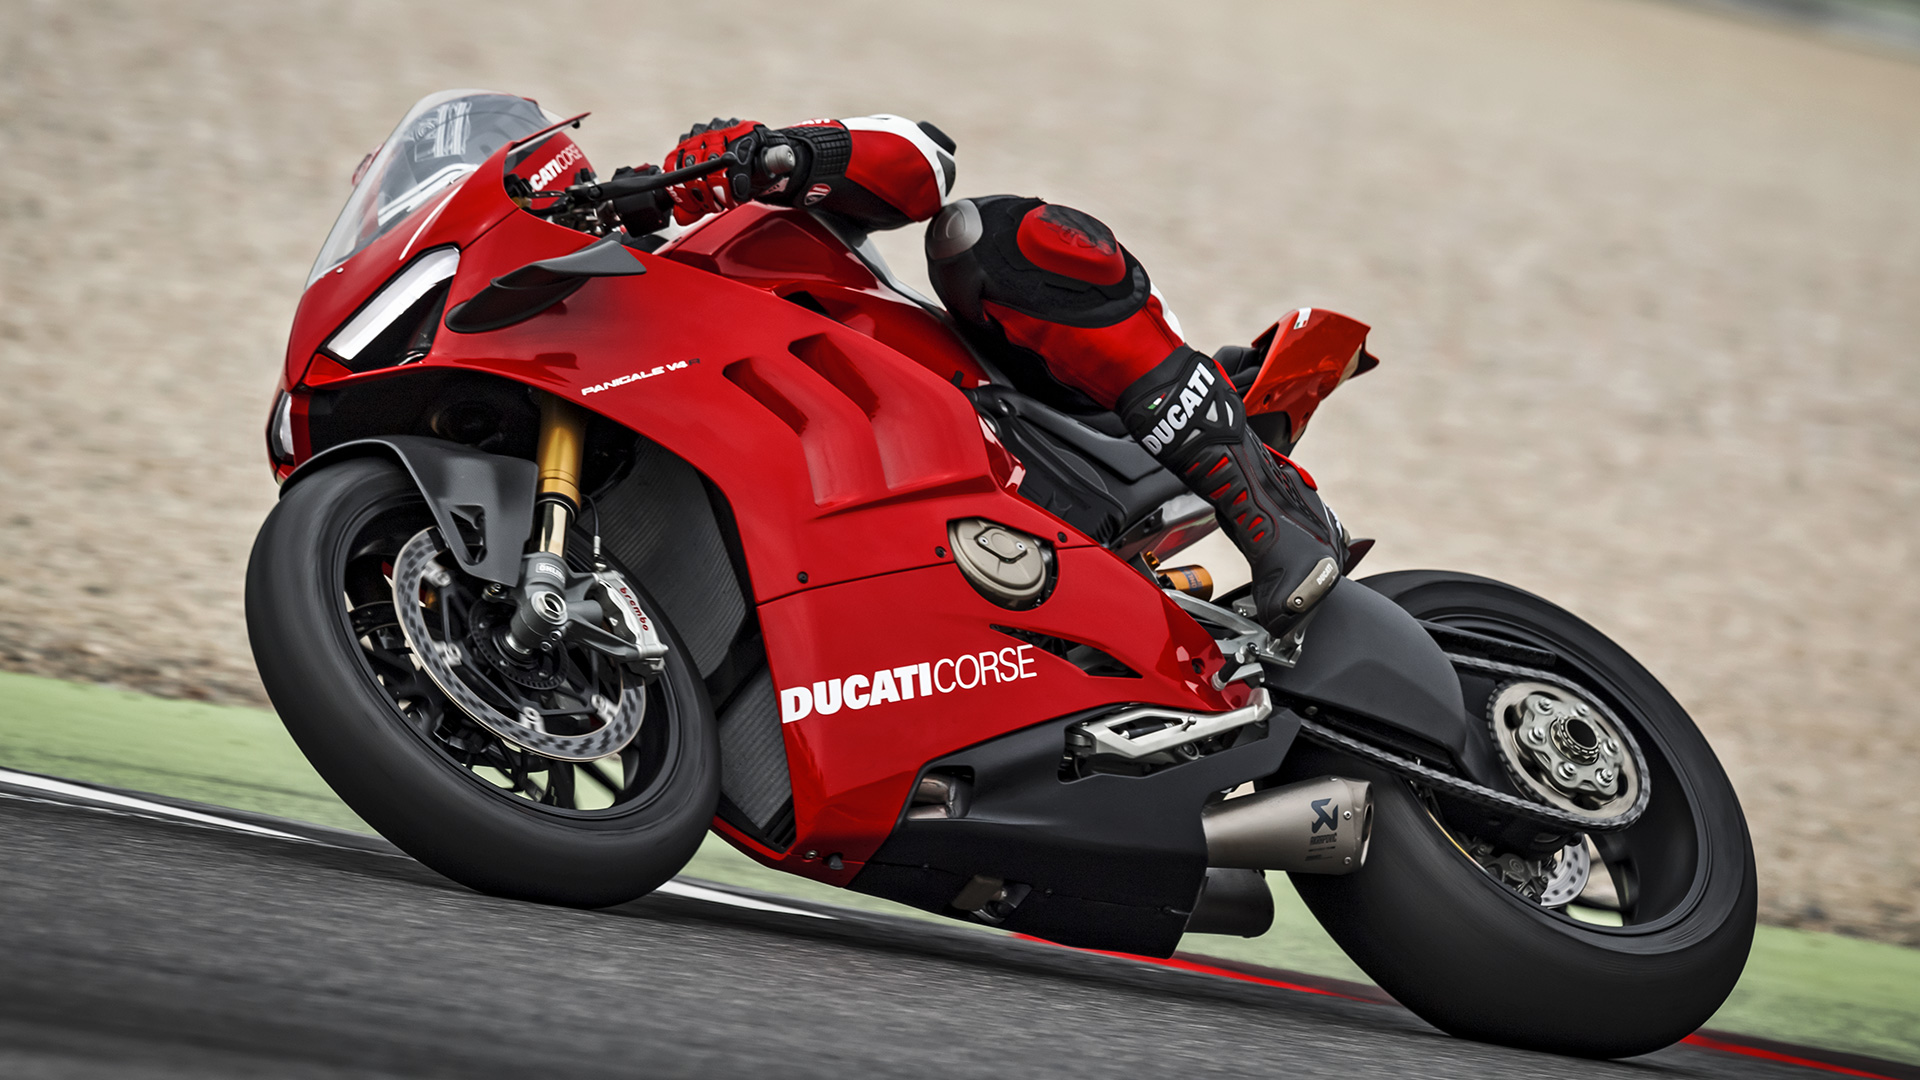 2021 Ducati Panigale V4 R Sports Motorcycle